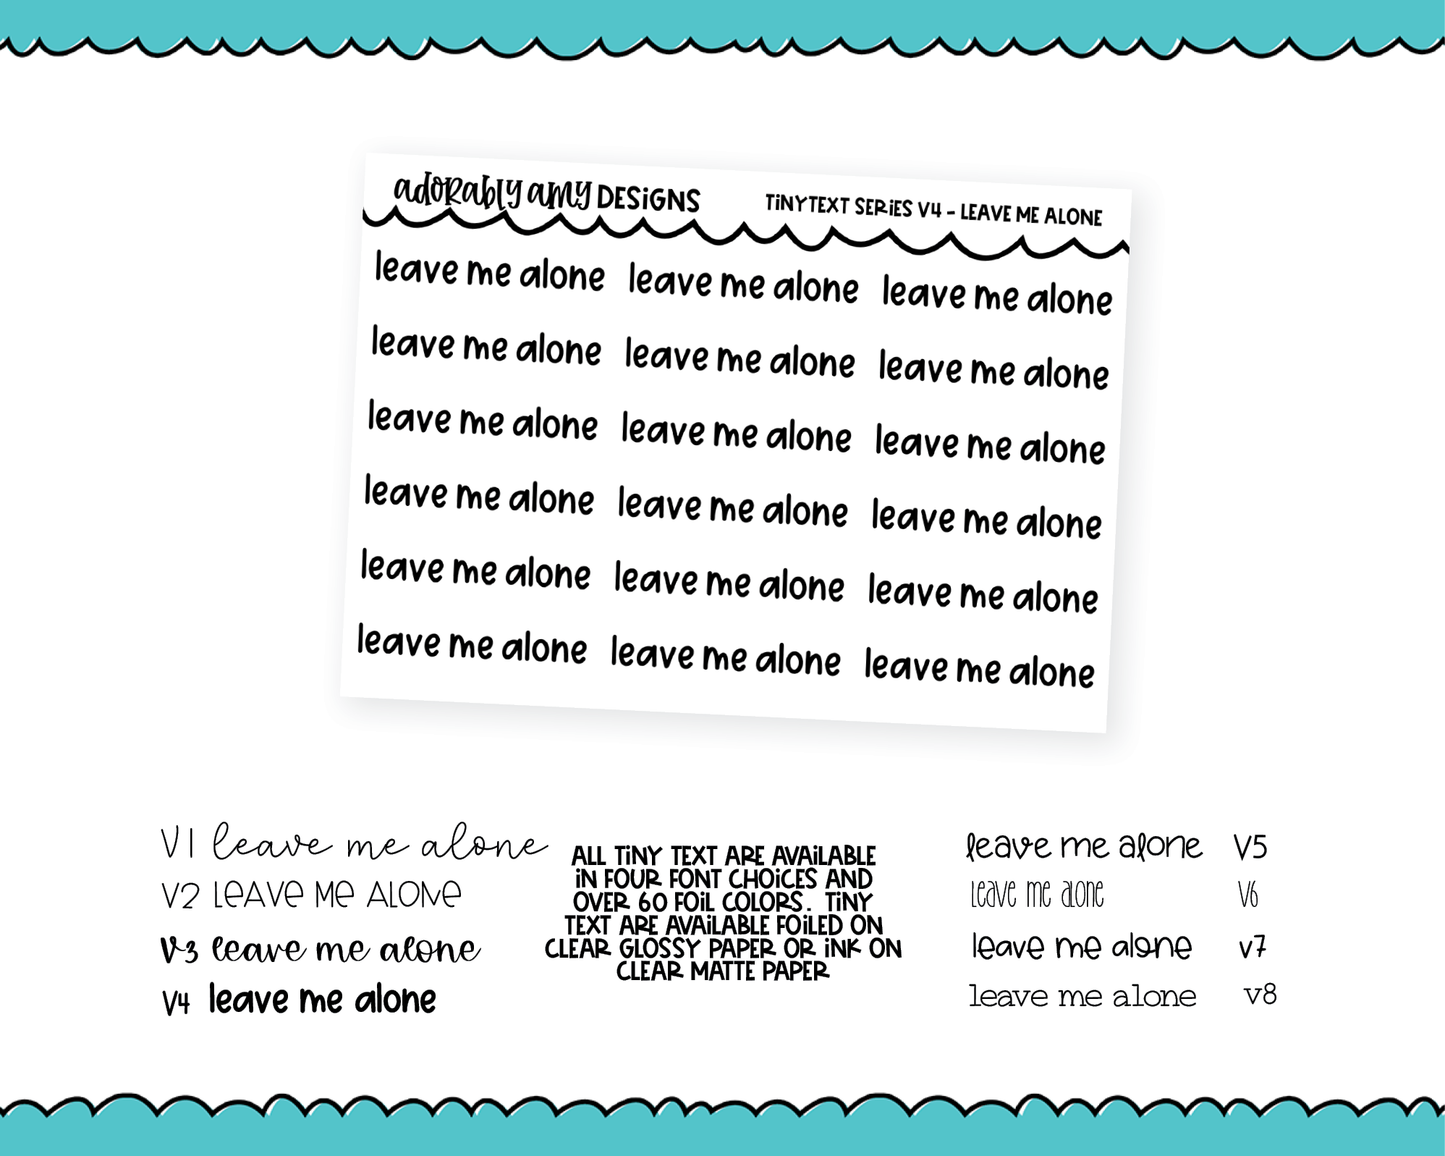 Foiled Tiny Text Series - Leave Me Alone Checklist Size Planner Stickers for any Planner or Insert